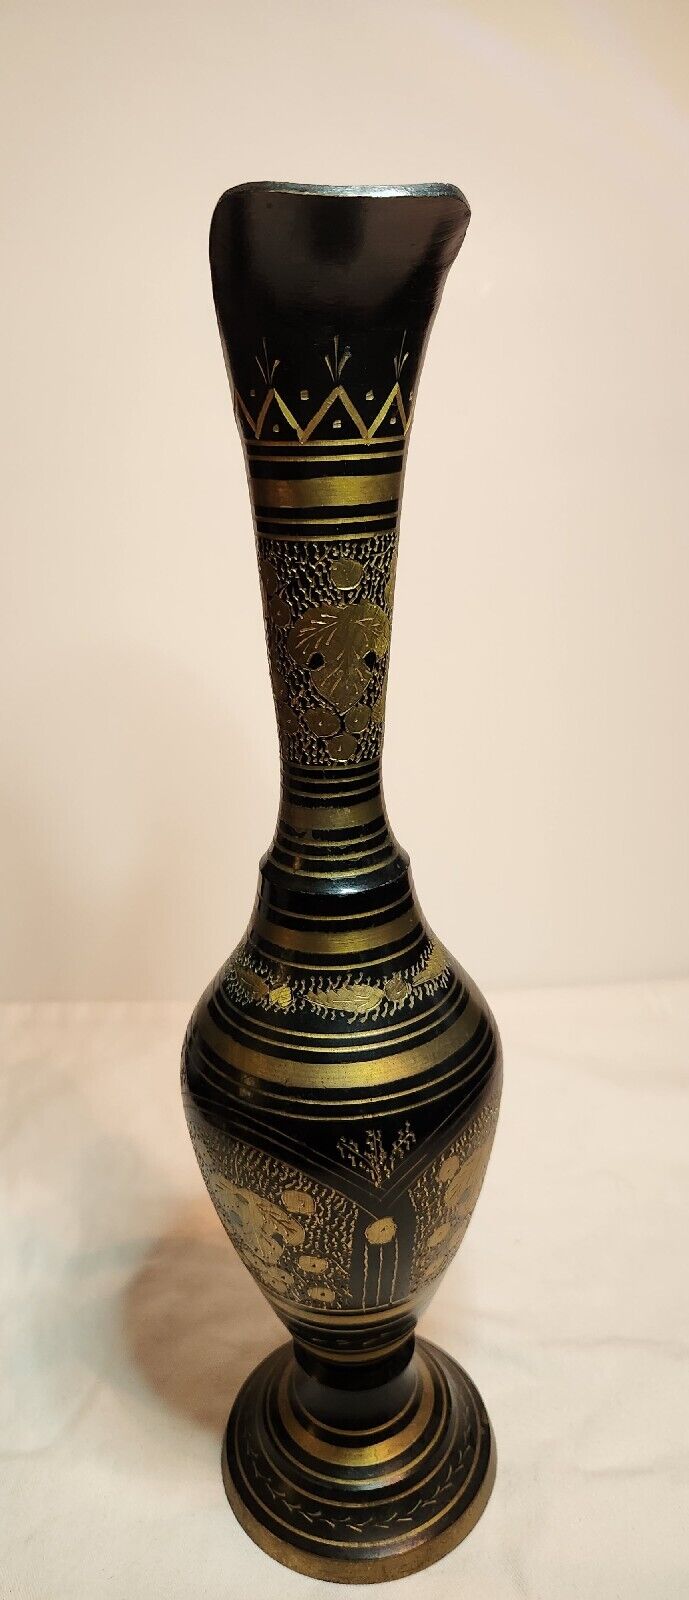 Vintage Etched Black And Gold Vase Made In India 14 Inches